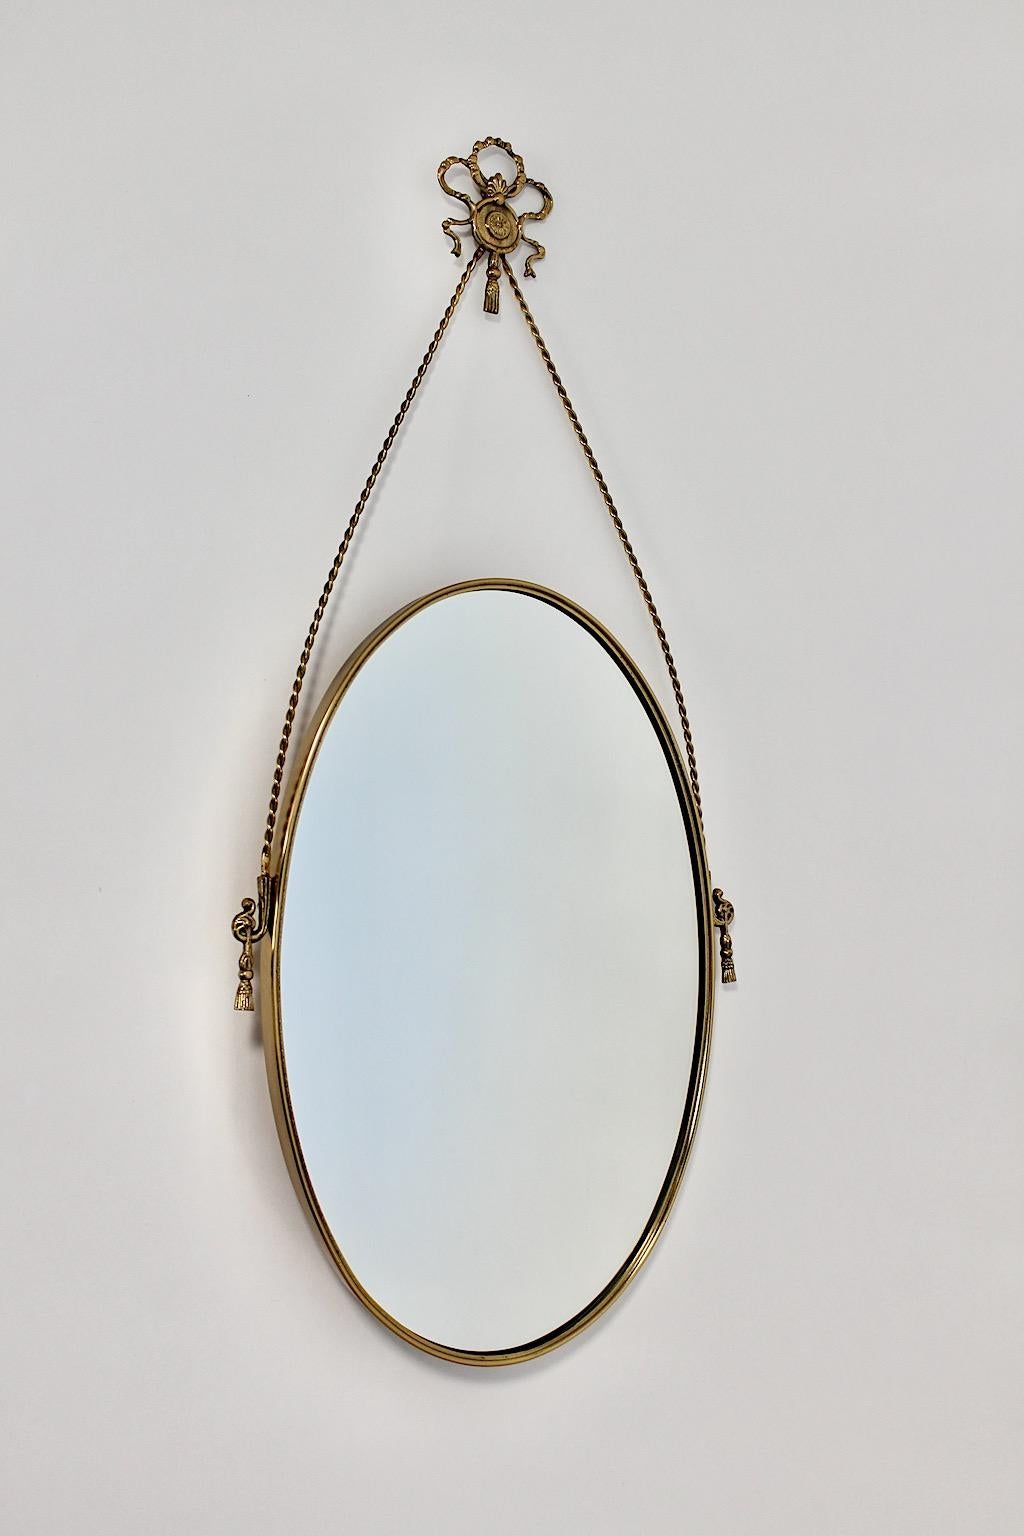 Hollywood Regency Style Vintage Brass Oval Wall Mirror, 1970s, Italy For Sale 1